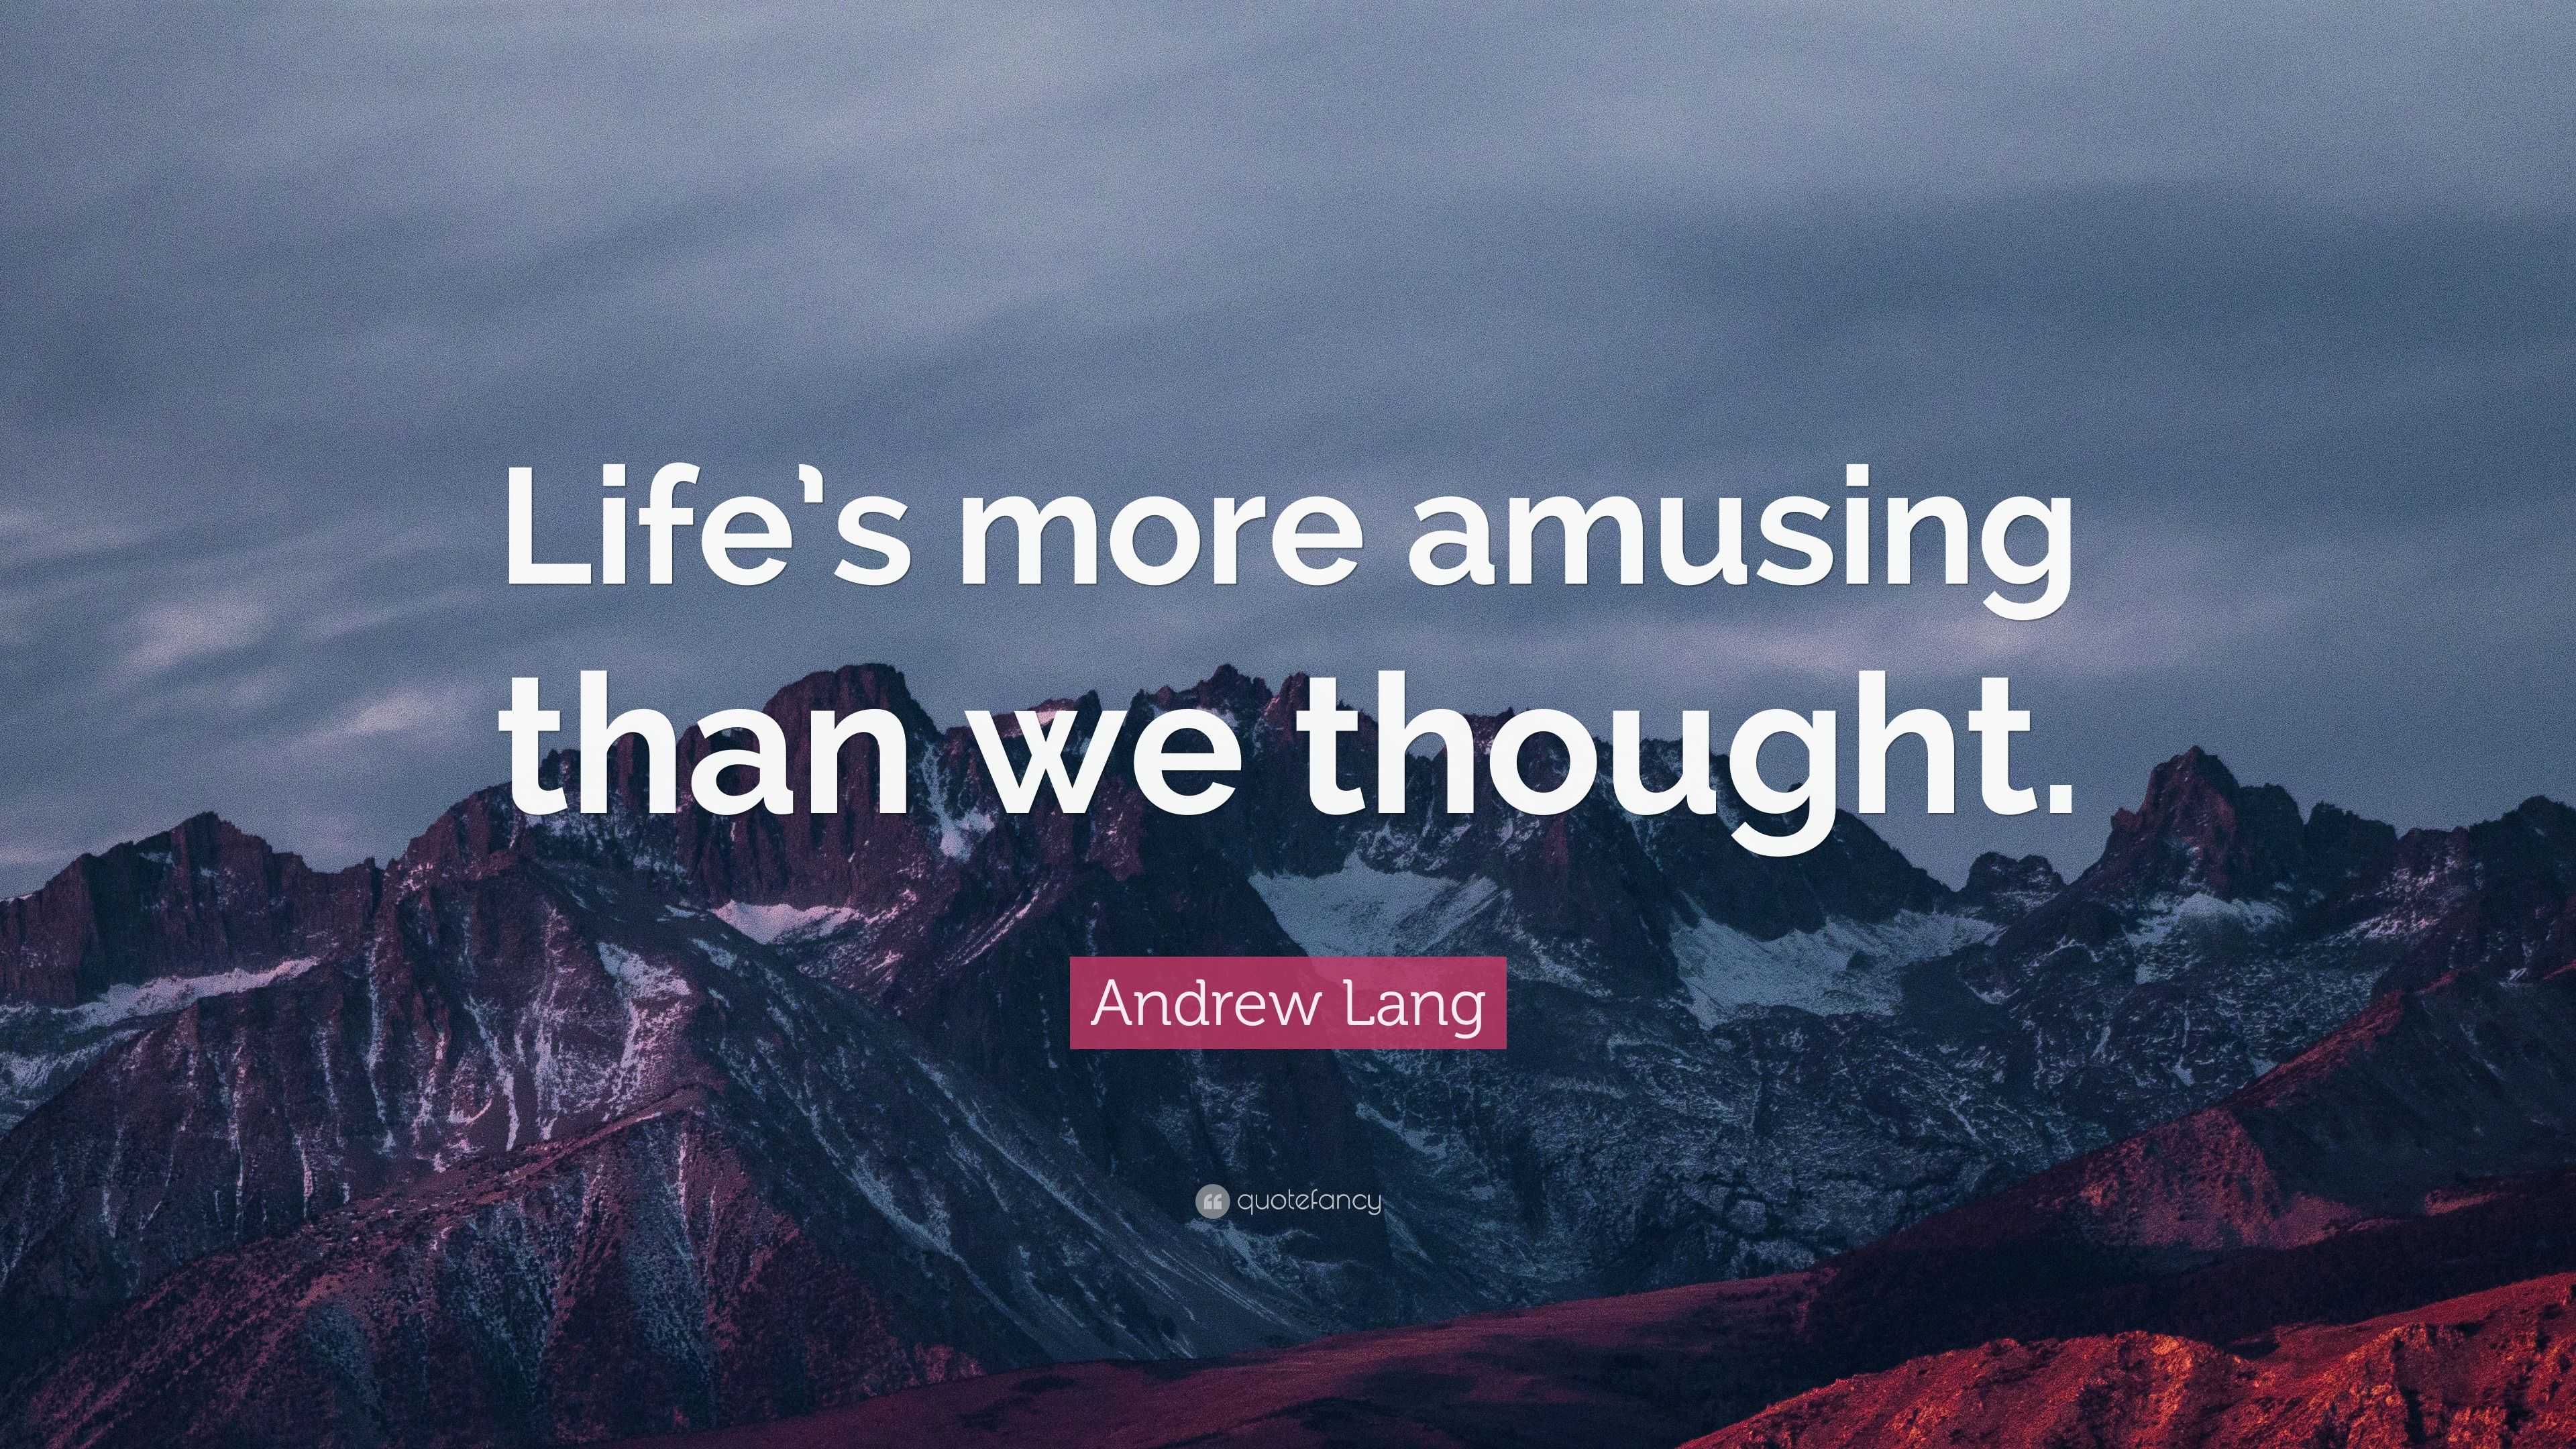 Andrew Lang Quote: “Life’s more amusing than we thought.”